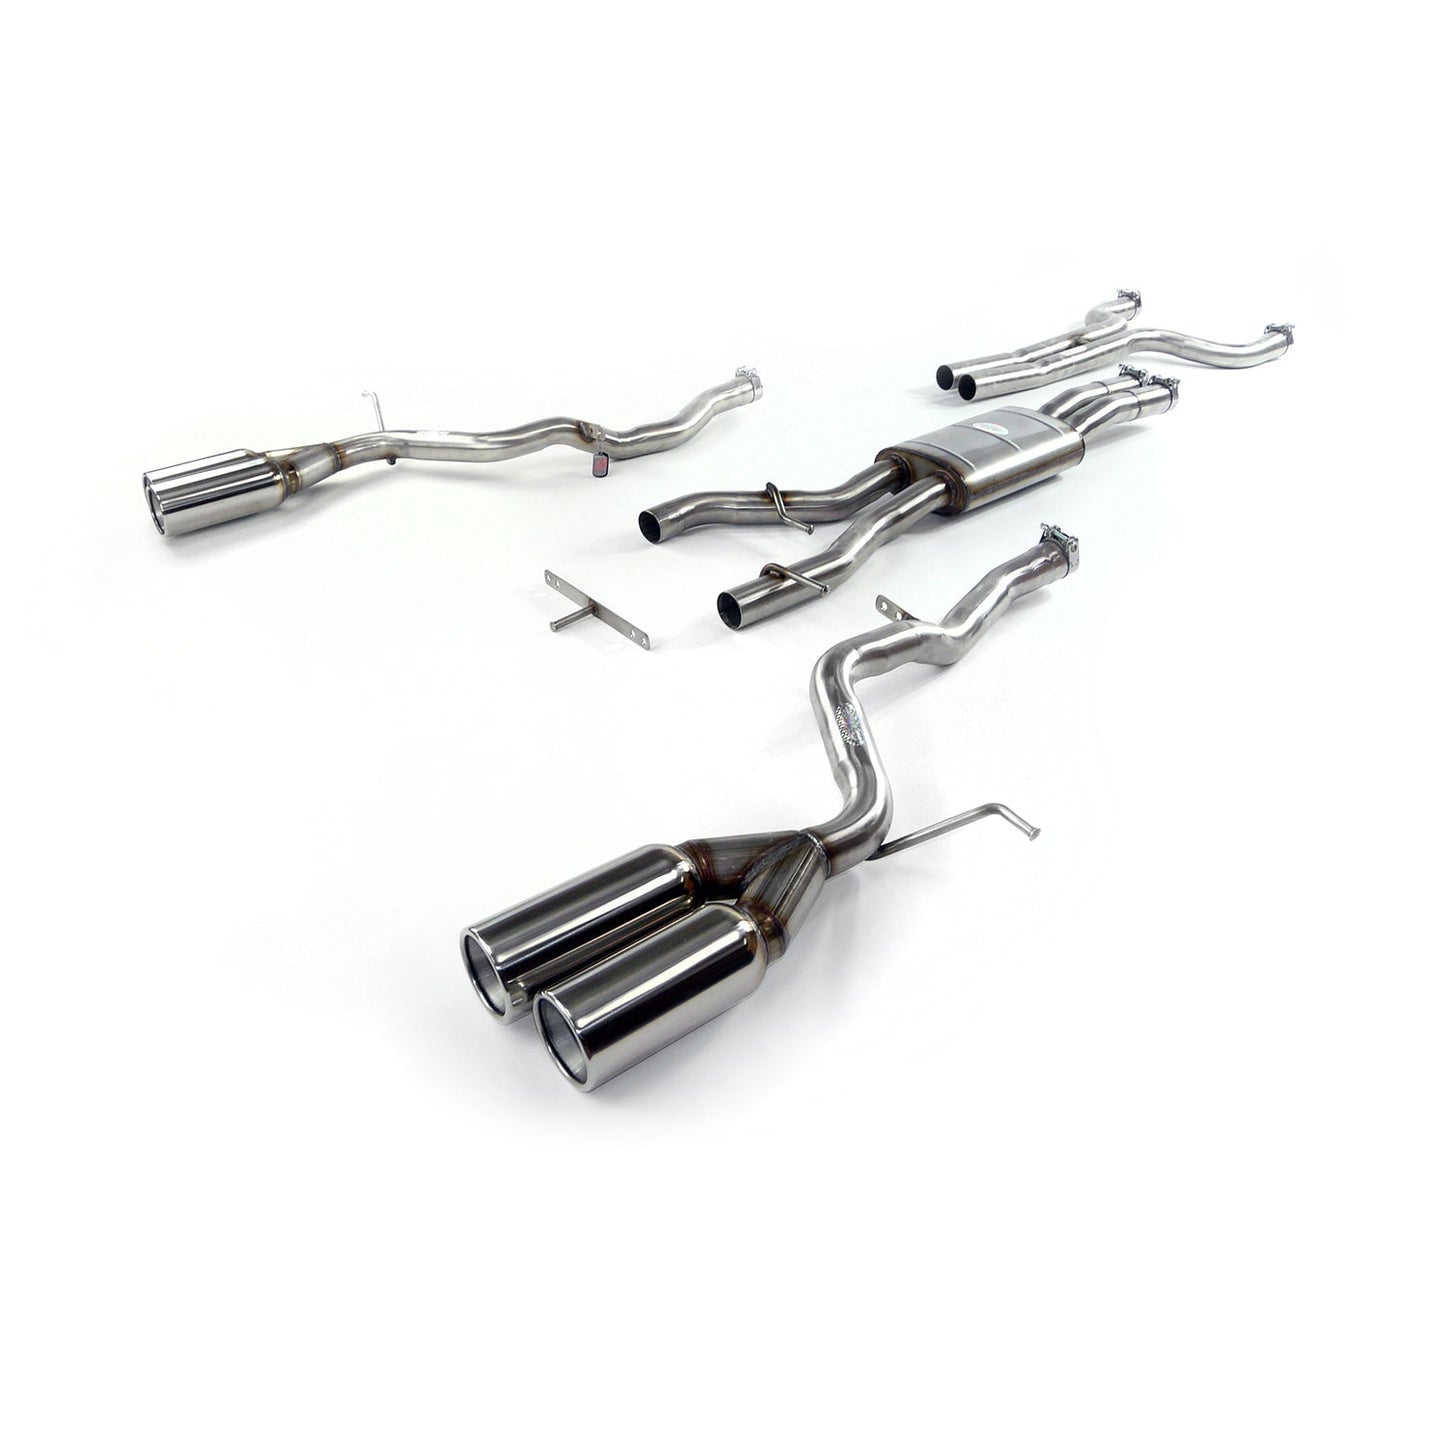 Jaguar XKR, XKR-S 5.0 Super Charged Sport Exhaust (2009-14) - QuickSilver Exhausts